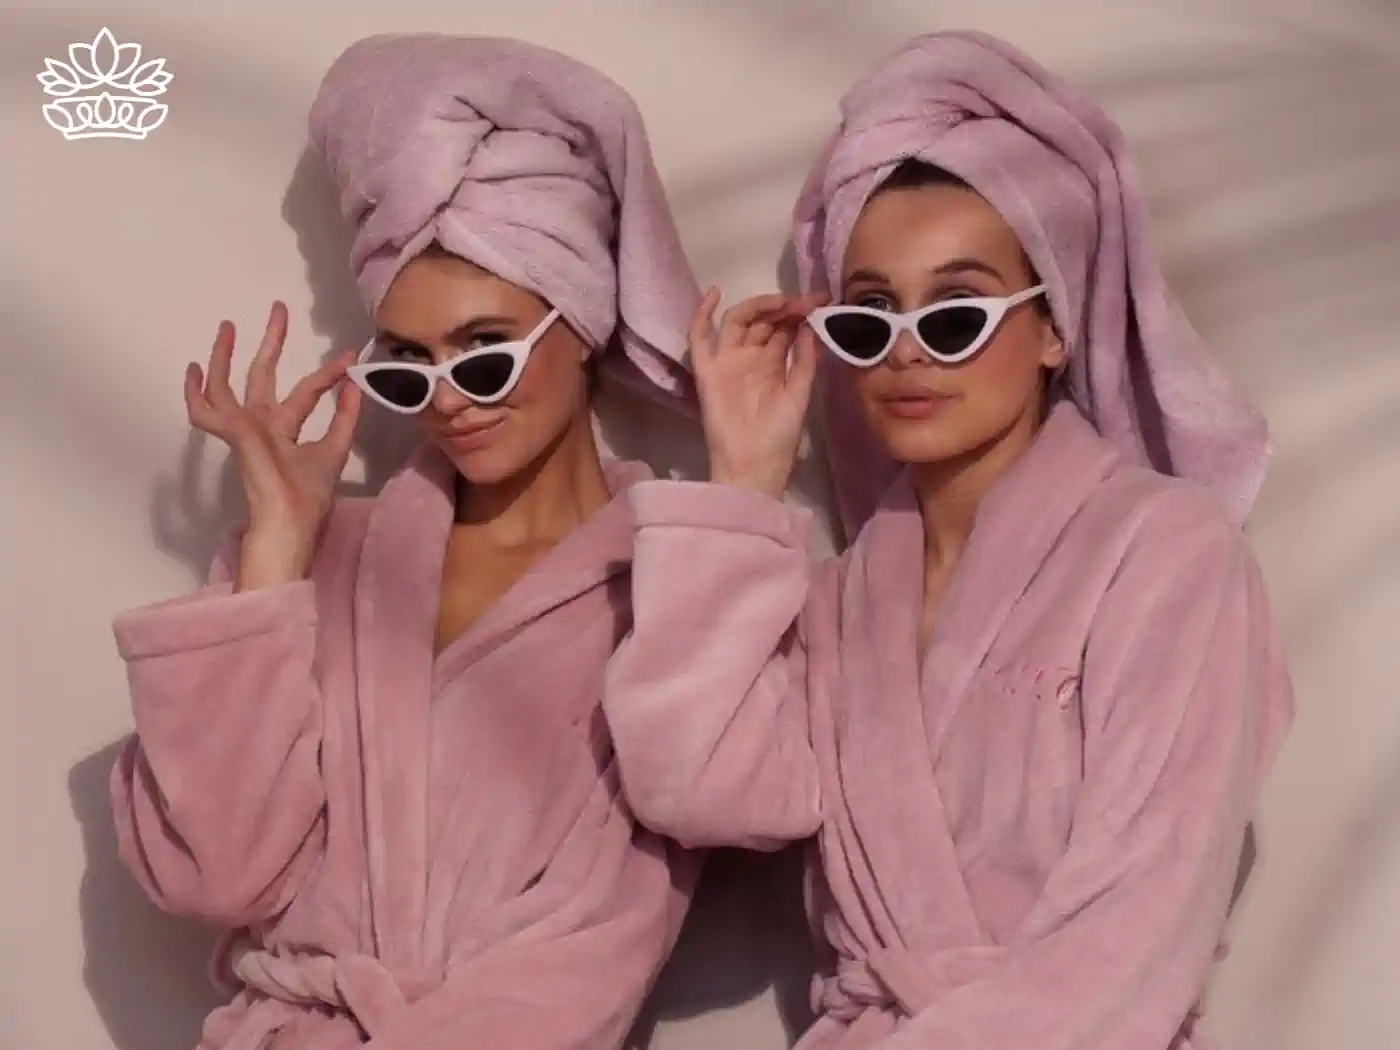 Two sisters in pink gowns and pink towel wraps on their hair, with white sunglasses posing for a picture.Gift Boxes for Sister. Fabulous Flowers and Gifts 